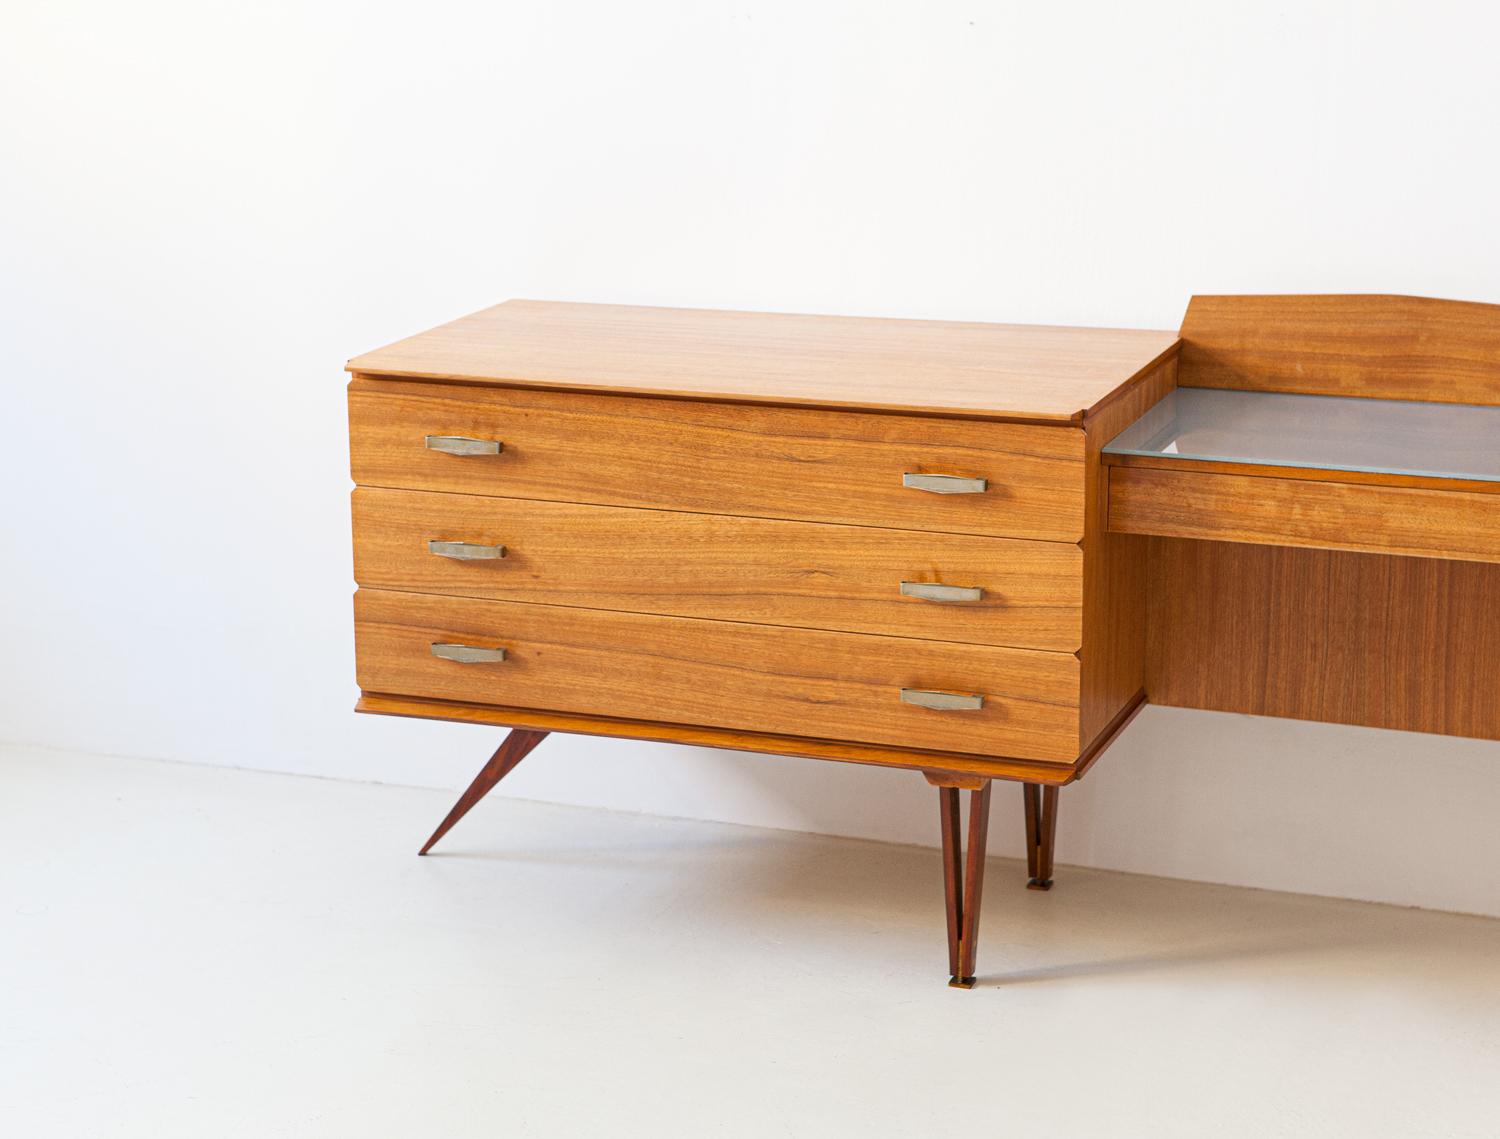 Elegant and modern sideboard manufactured in Italy during the 1950s
High quality Italian manufacture, sophisticated design

This dressing table has 4 drawers on the left, a small shelf with drawer in the center, finished with back-lacquered glass